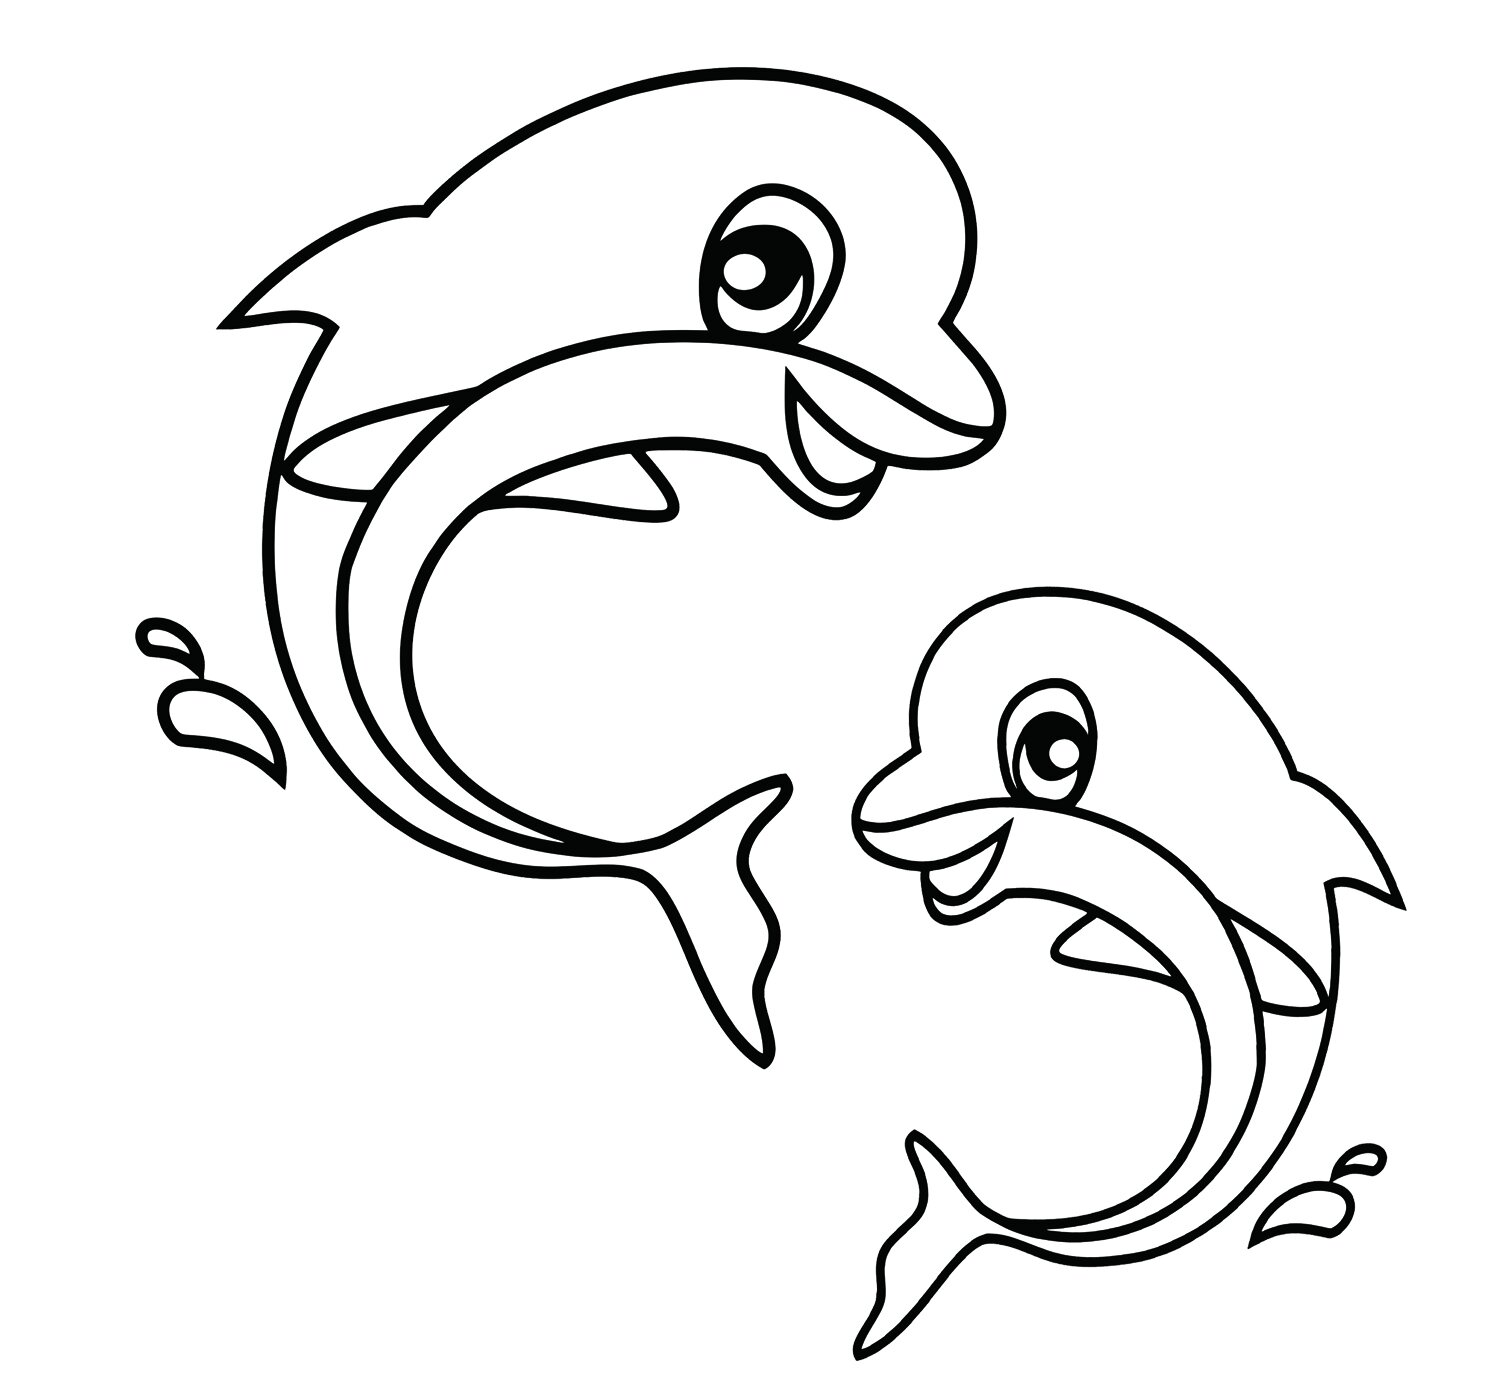 Sea animal coloring pages,free printable kids ocean animals coloring book